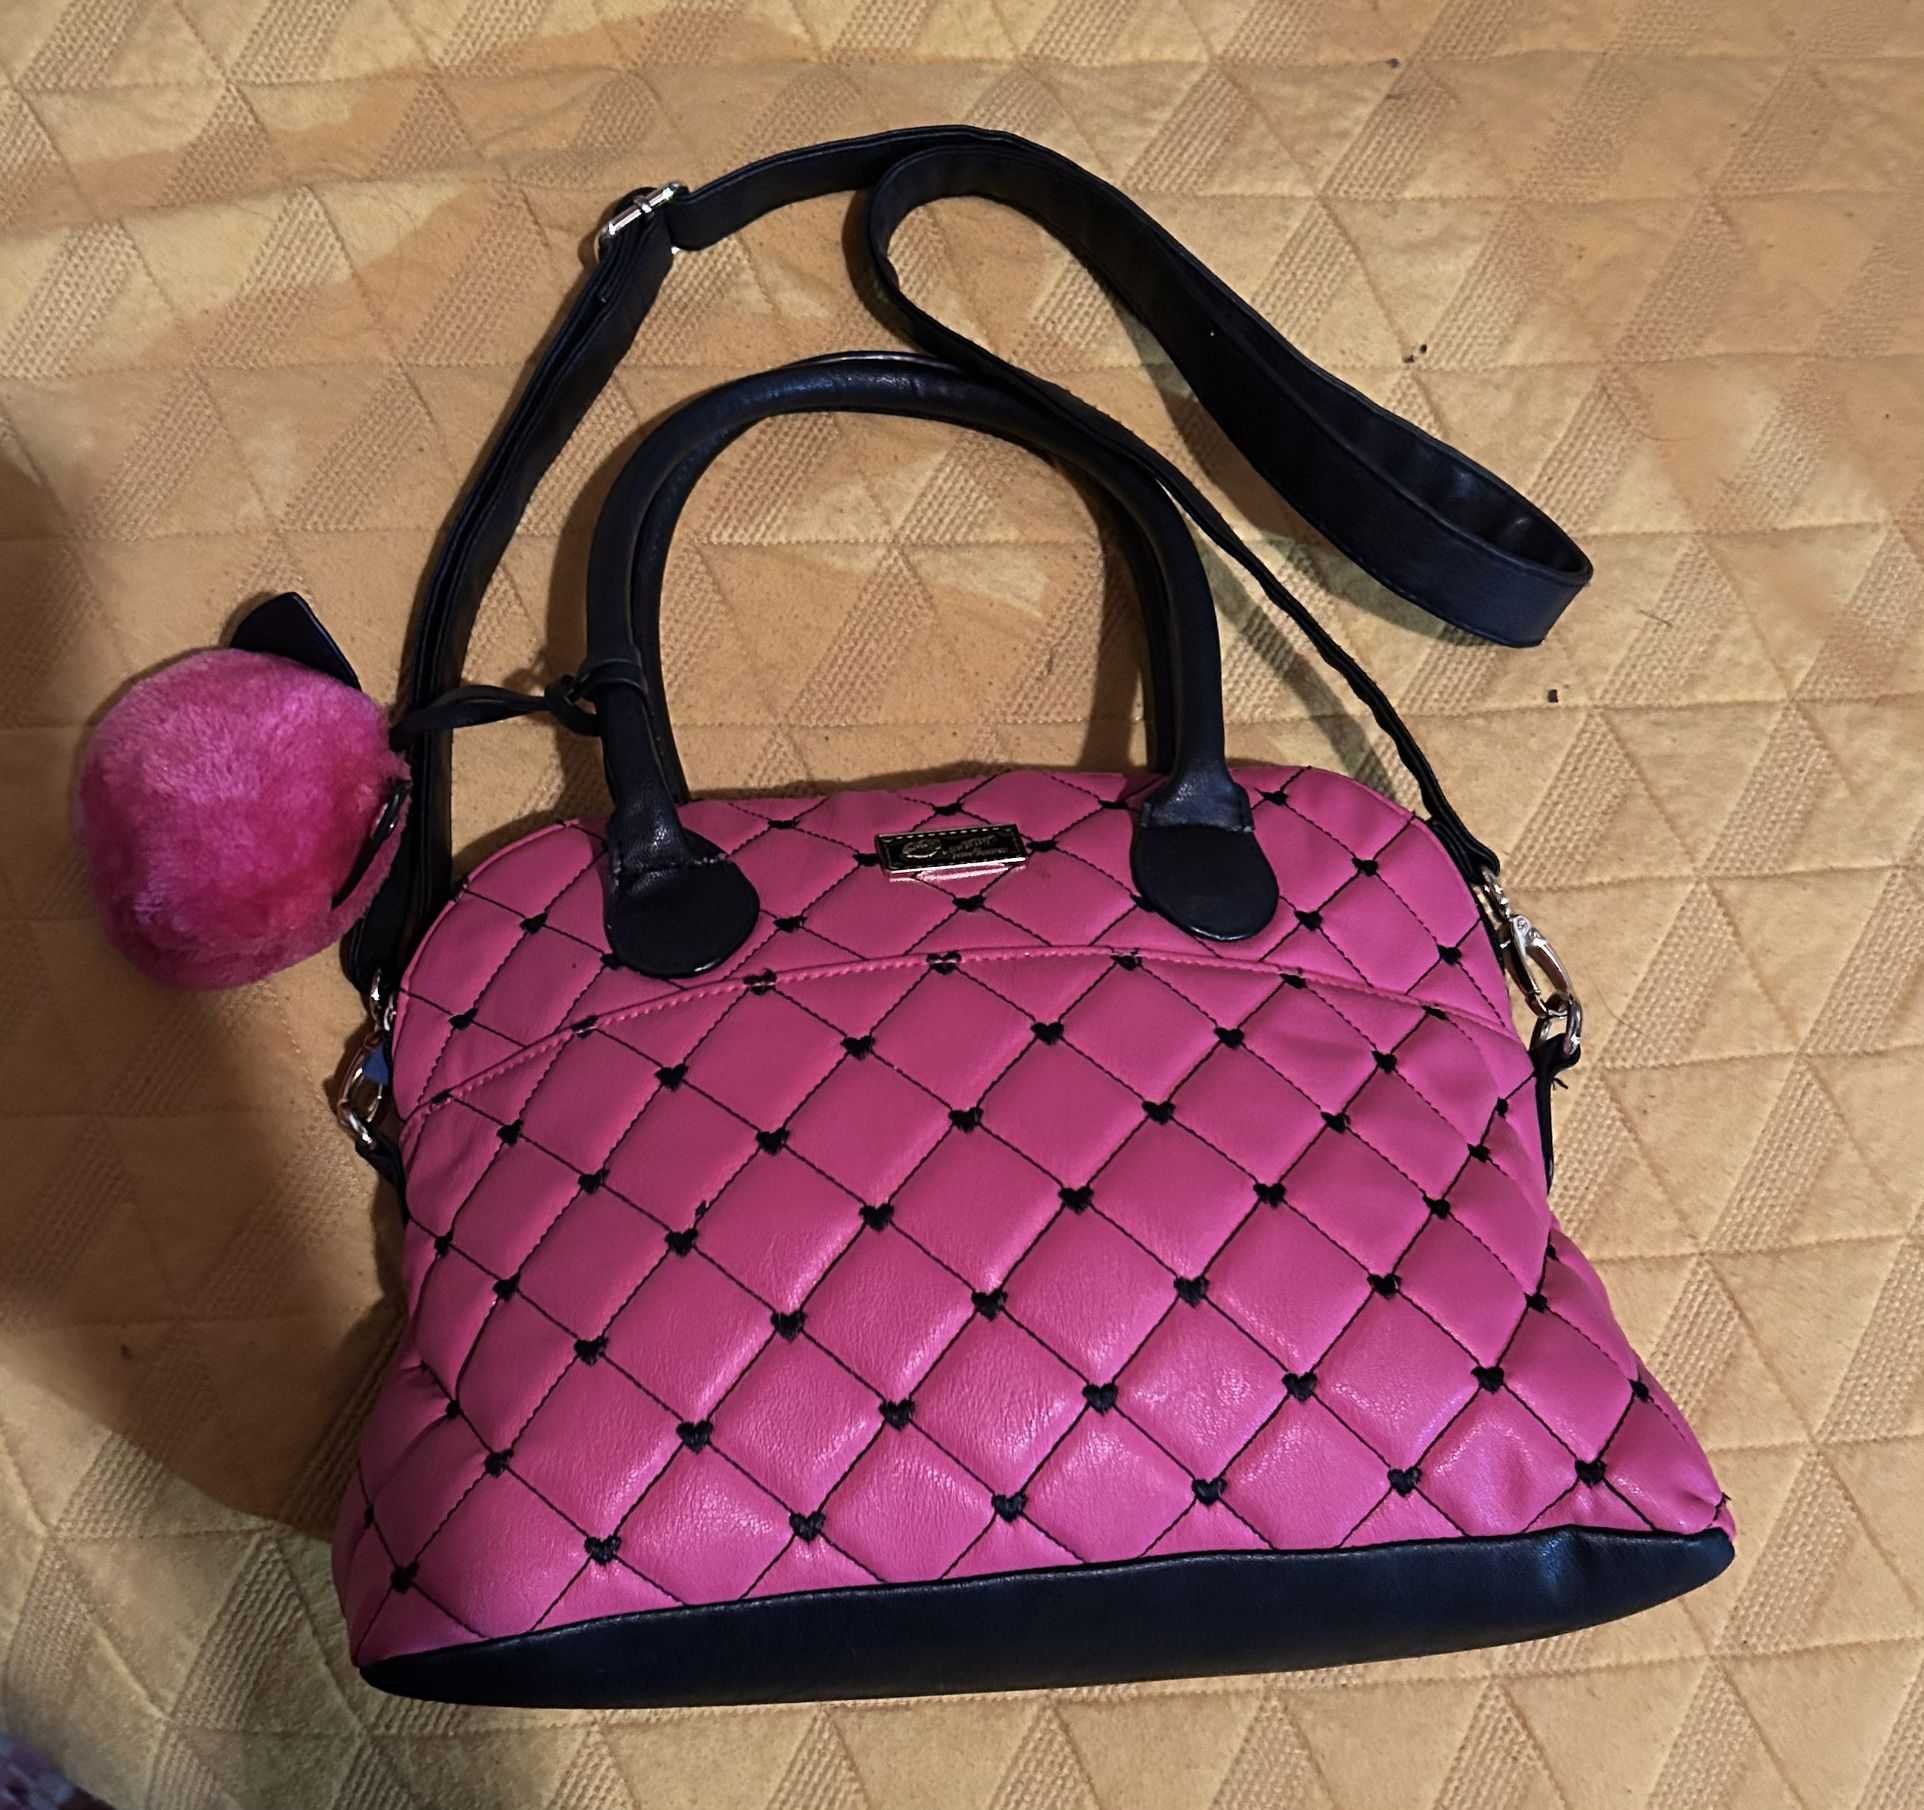 Betsey Johnson hot pink and black quilted purse. 